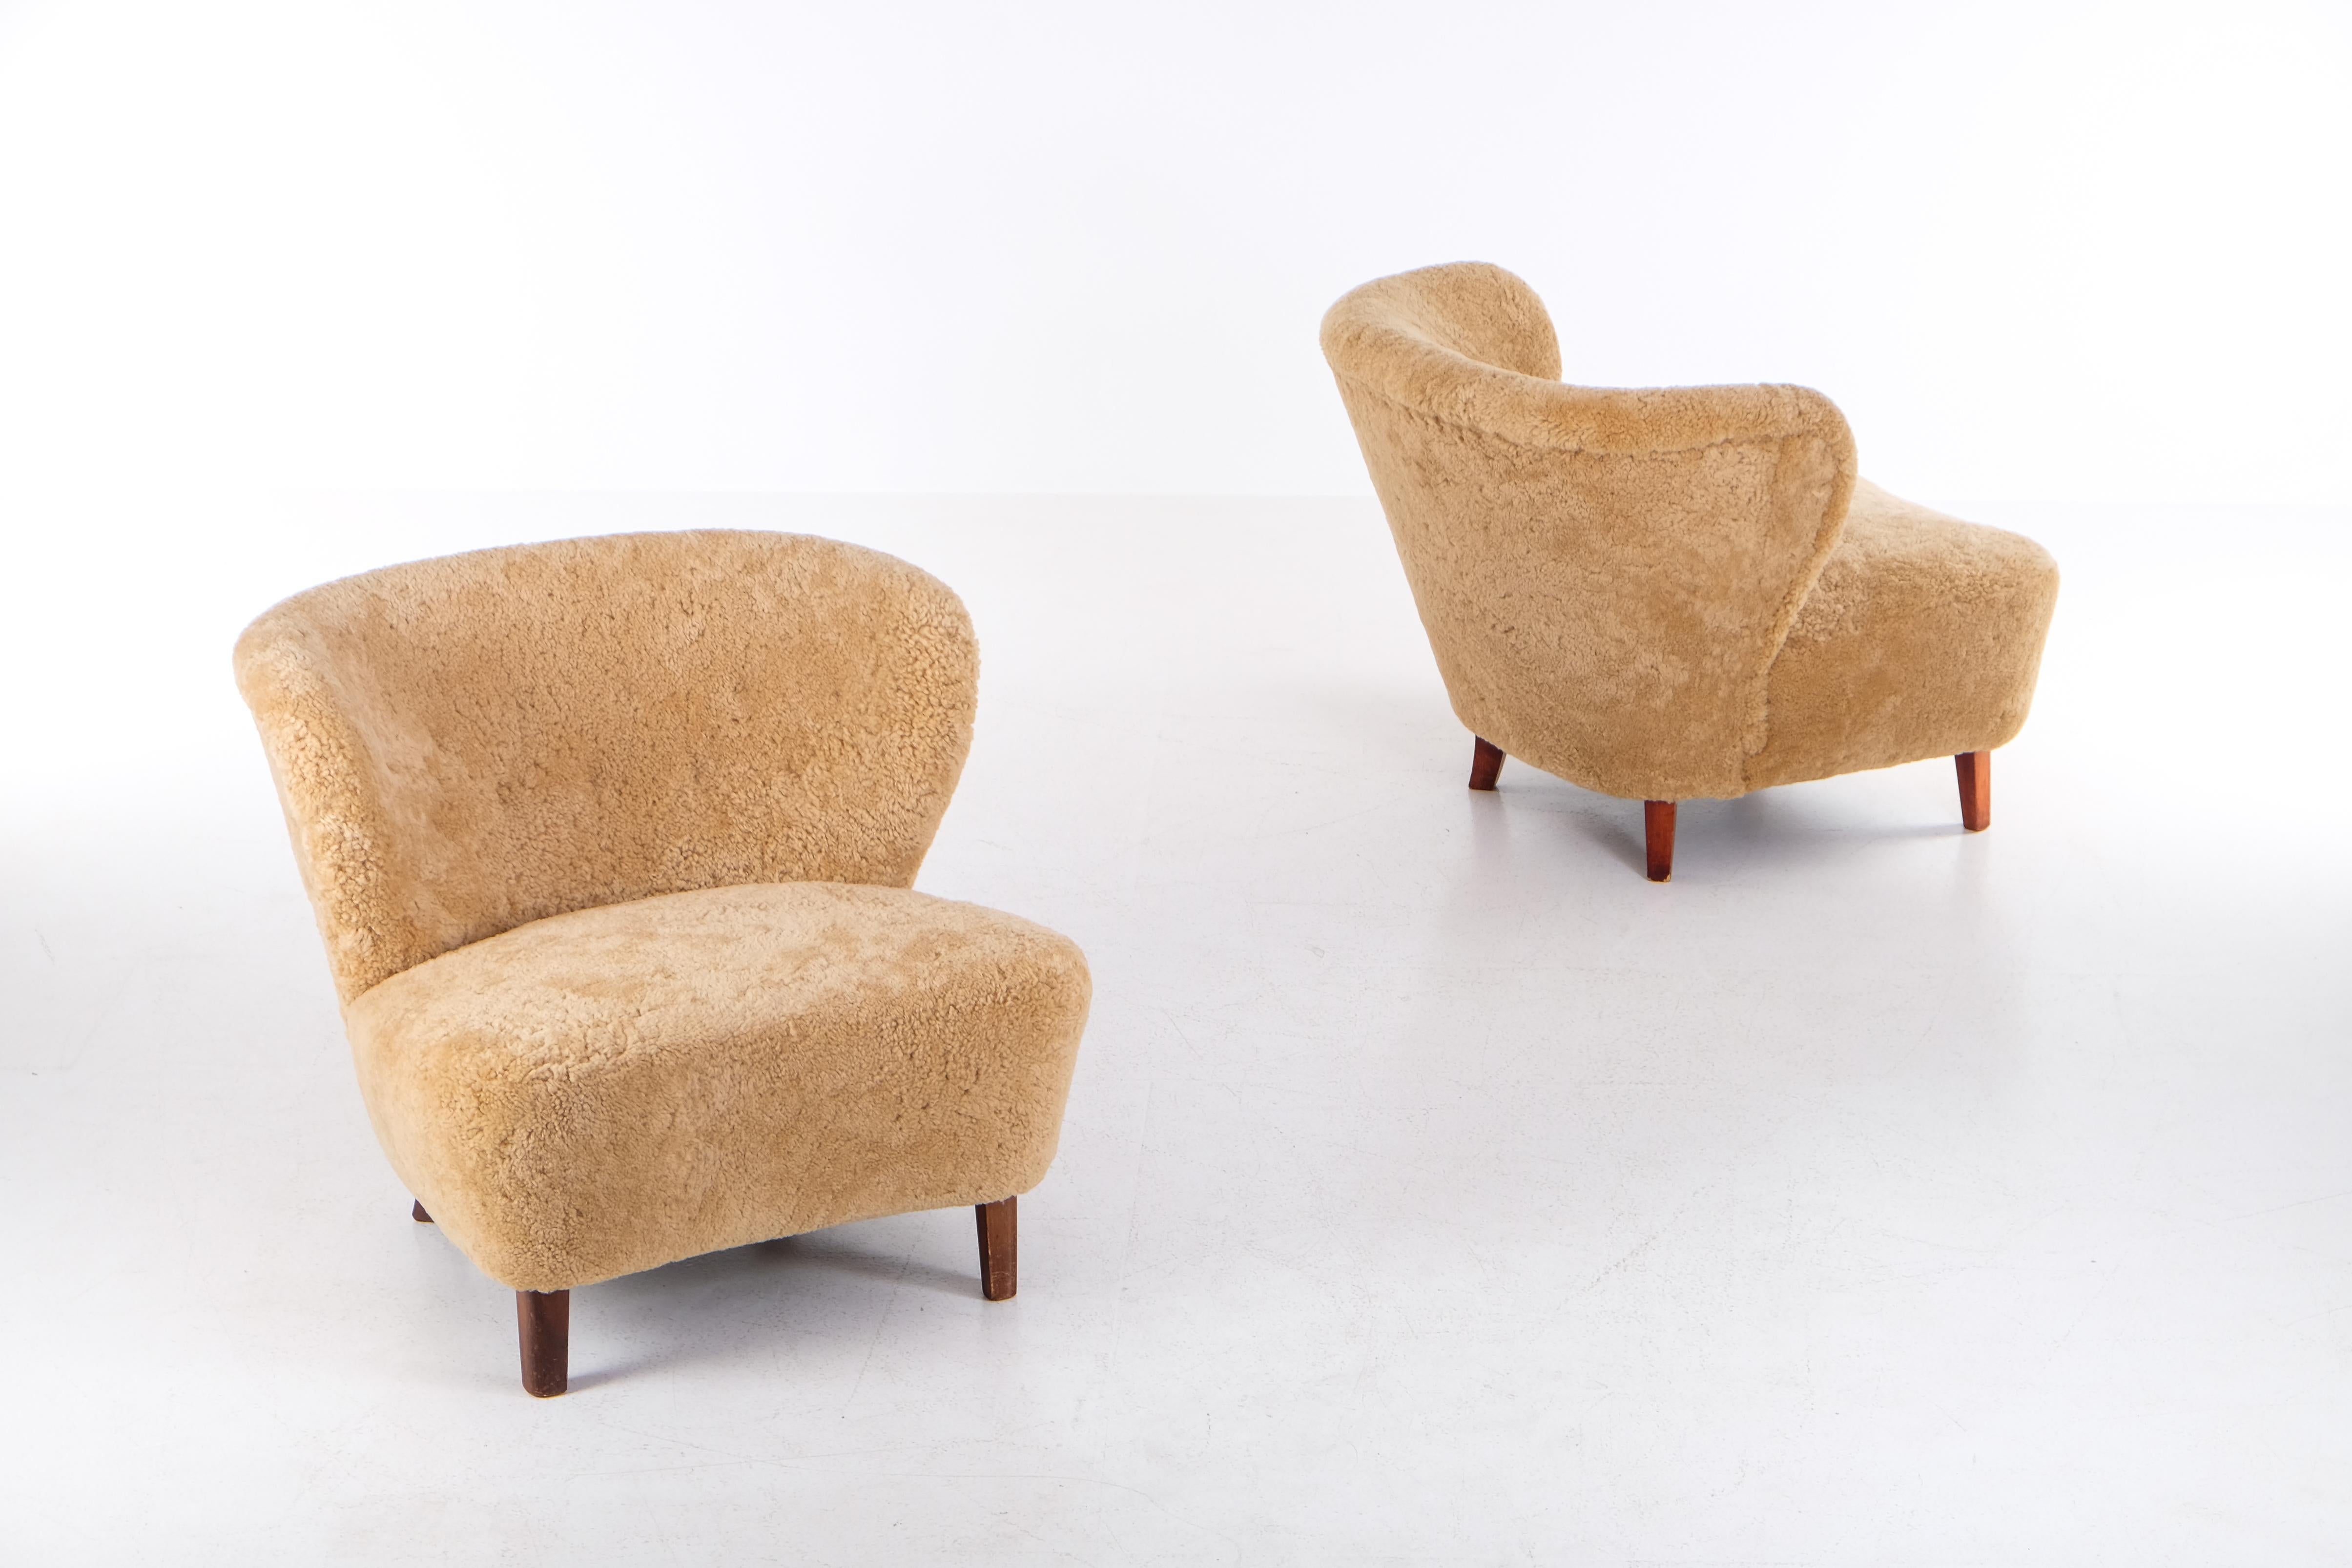 Mid-20th Century Pair of Easy Chairs by AB Erik Ek's Snickerifabrik, Malmö, Sweden, 1940s For Sale